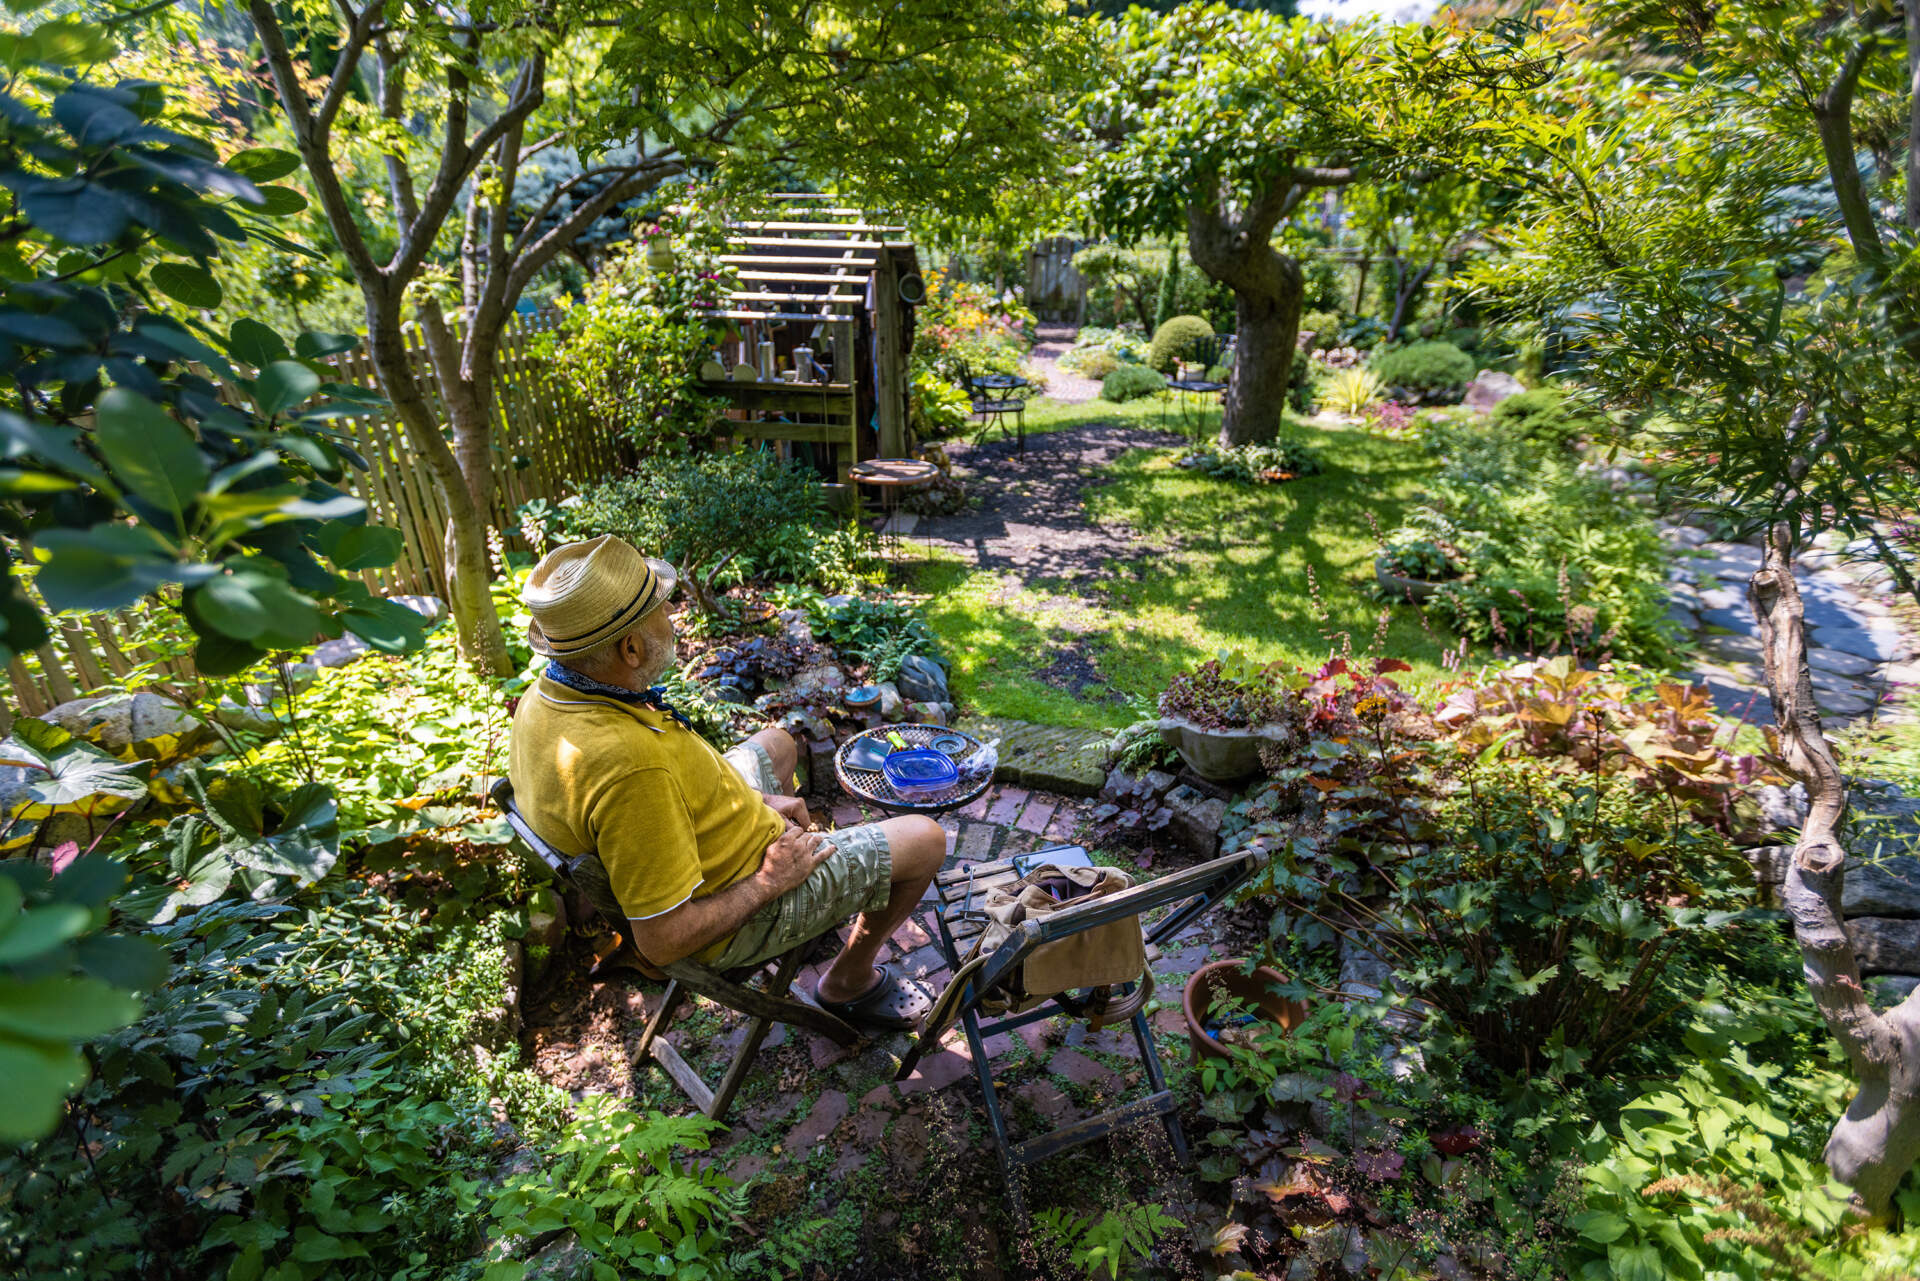 Richard Malkasian sits and relaxes in his garden plot, 36 years in the making, at the Fenway Victory Gardens. (Jesse Costa/WBUR)